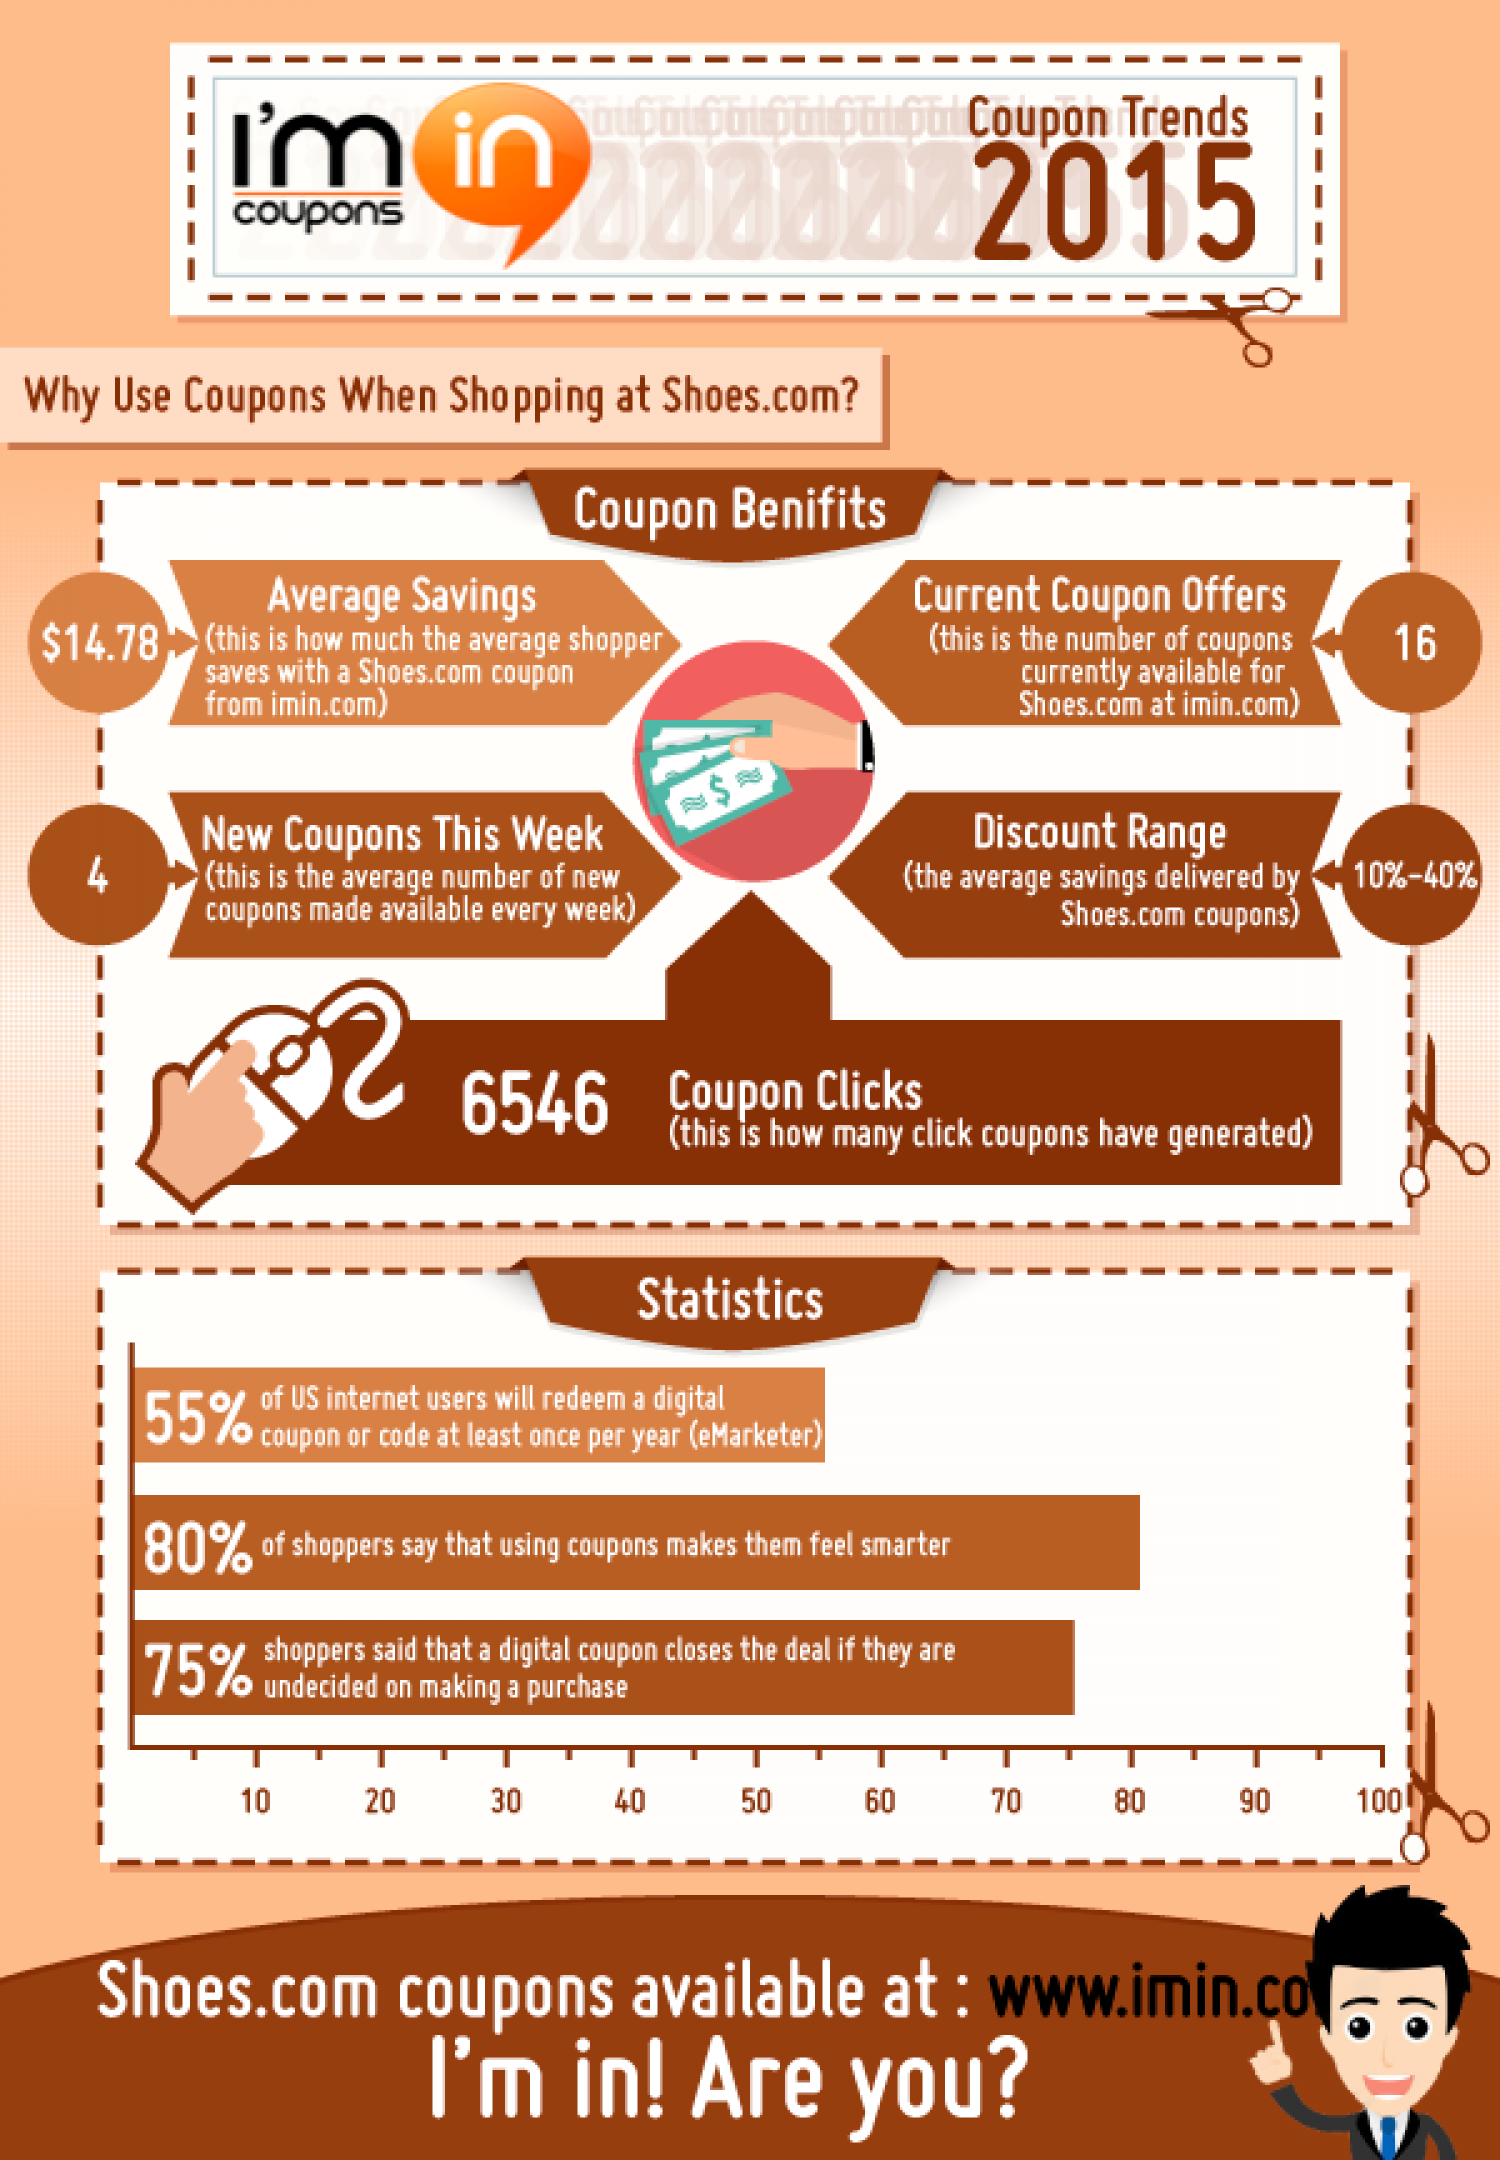 How Much Can You Save with Shoes.com Coupons in 2015 Infographic